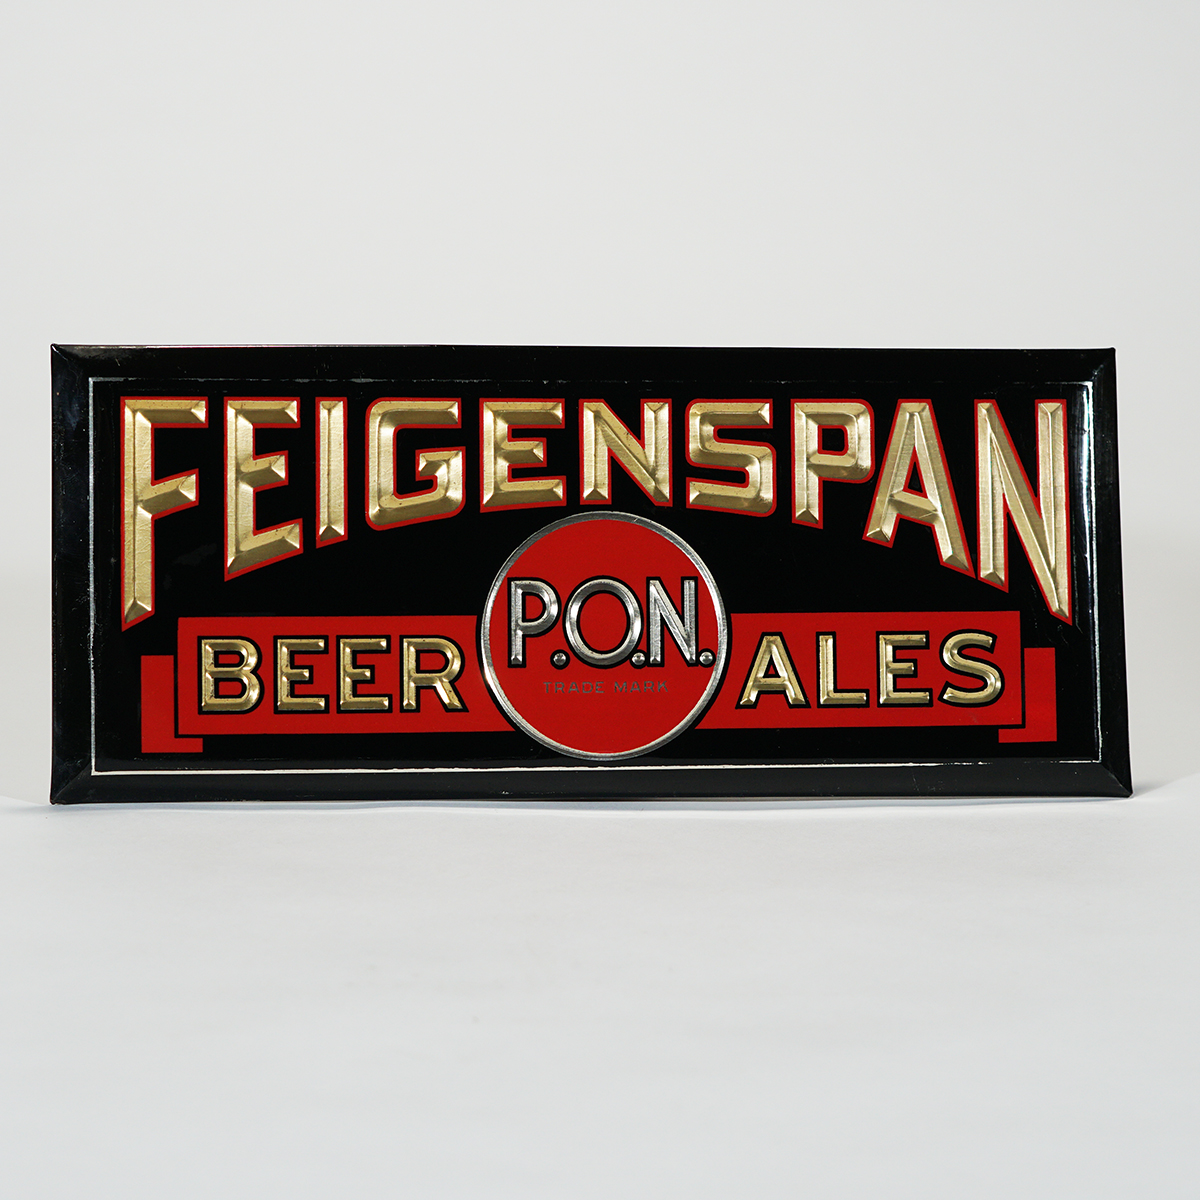 Feigenspan P.O.N. Beer Ales Celluloid Over TOC Sign